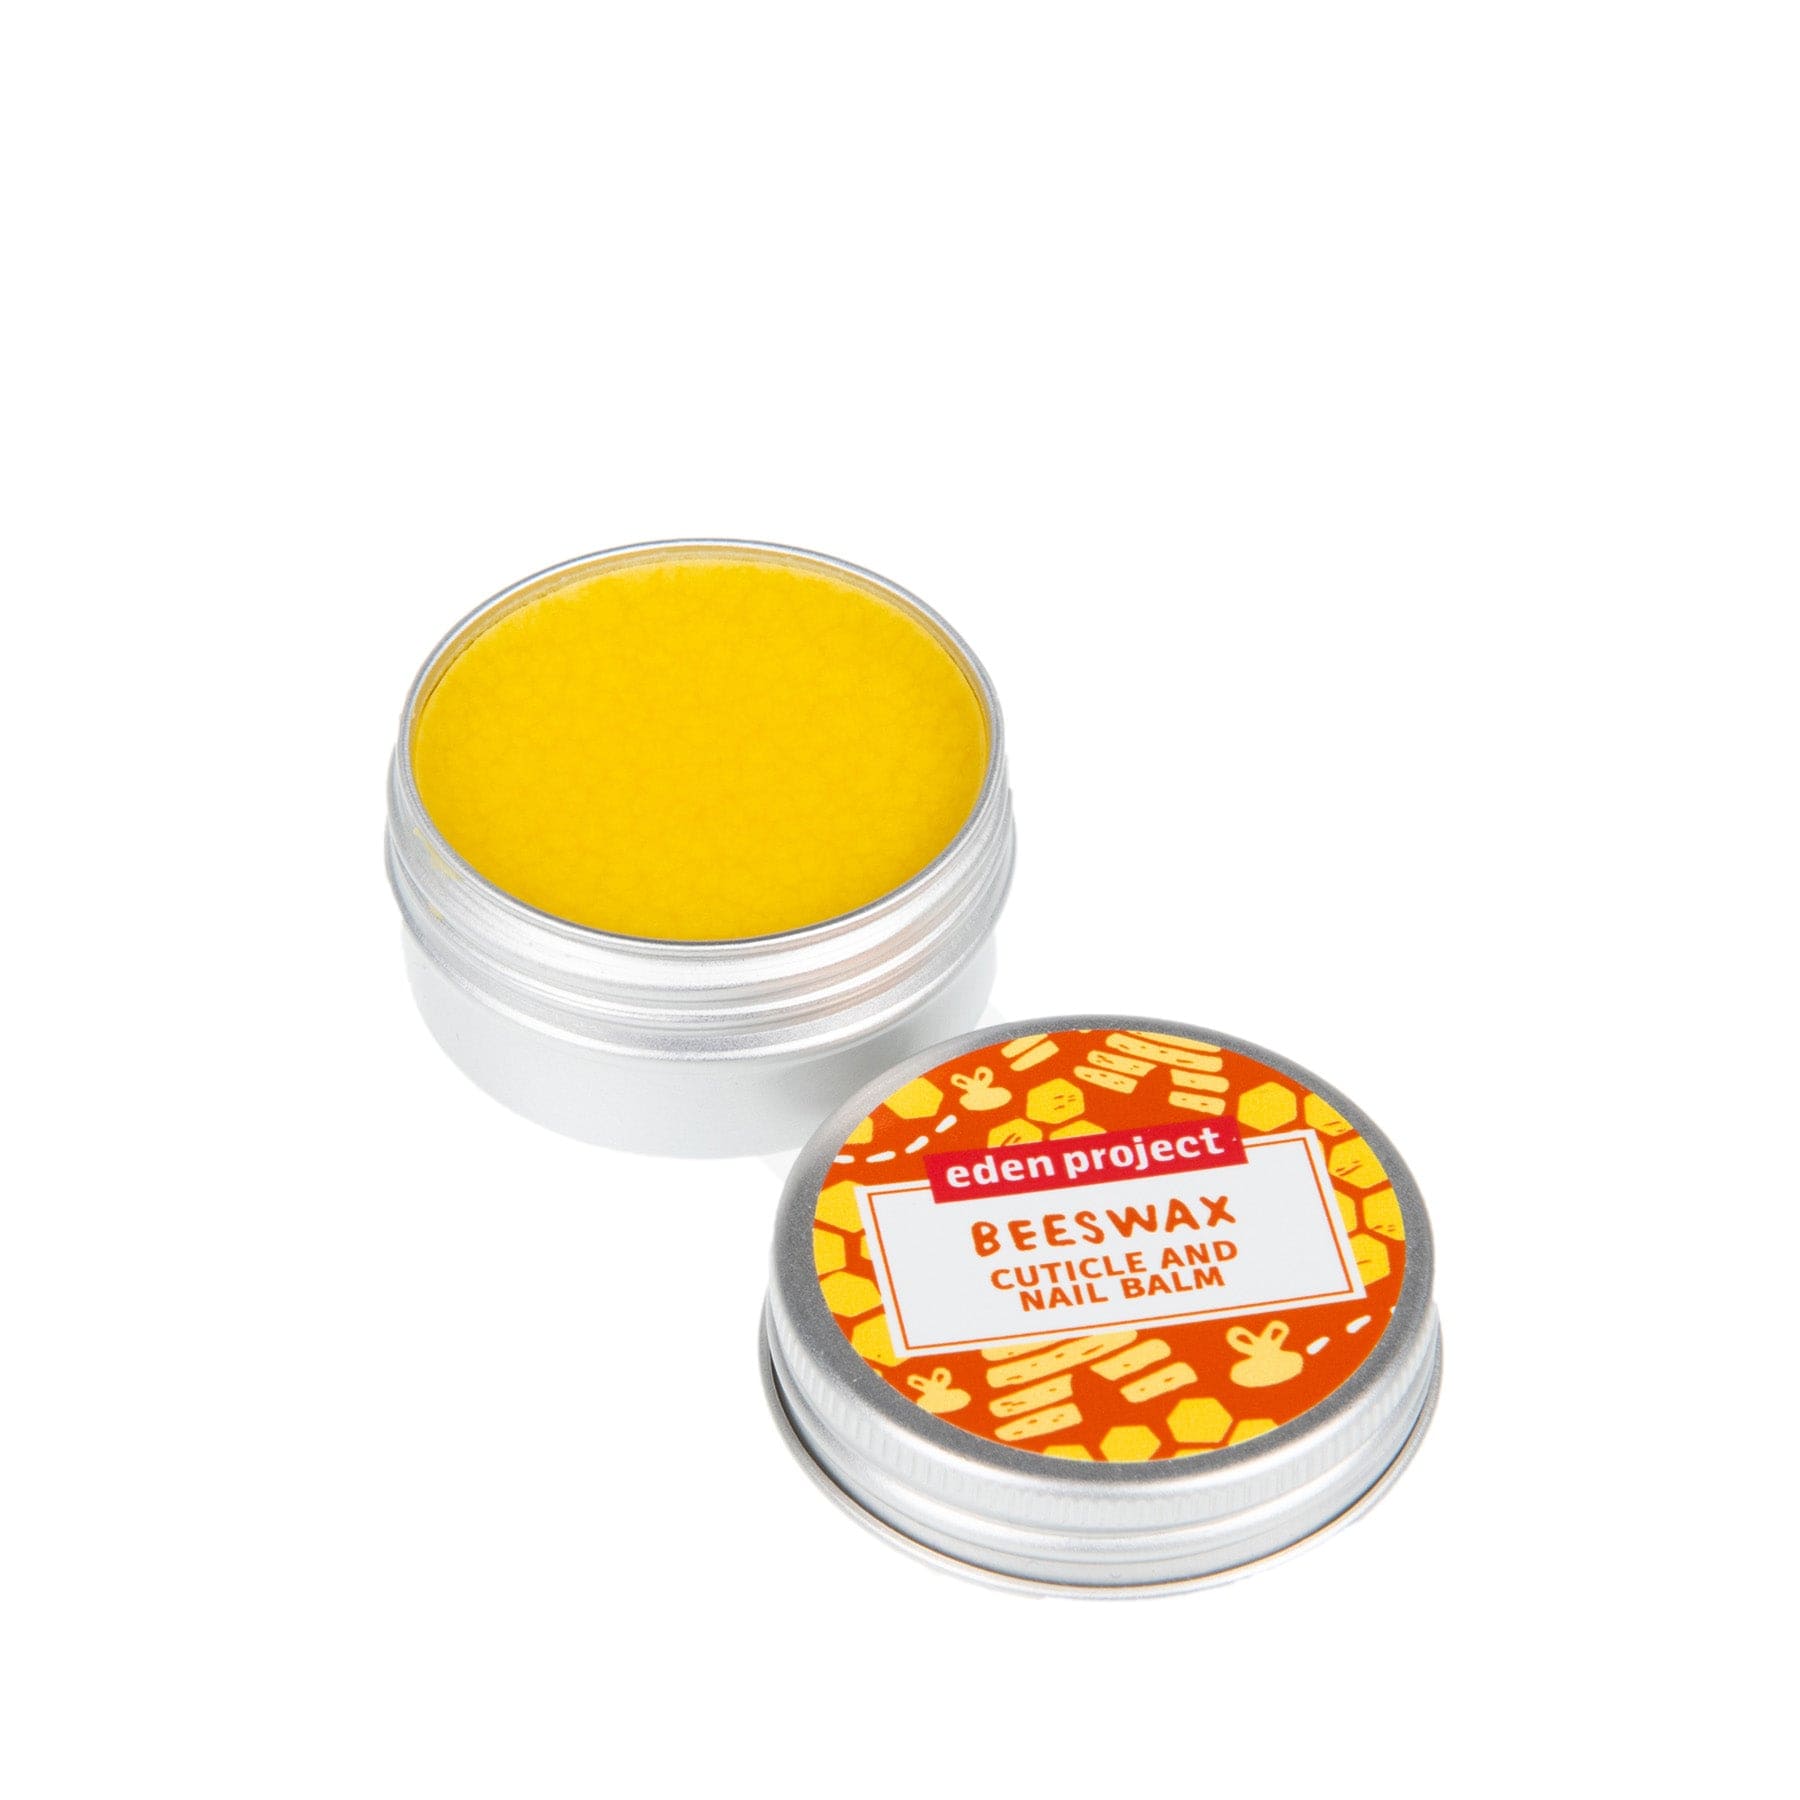 Beeswax and shea butter nail and cuticle balm